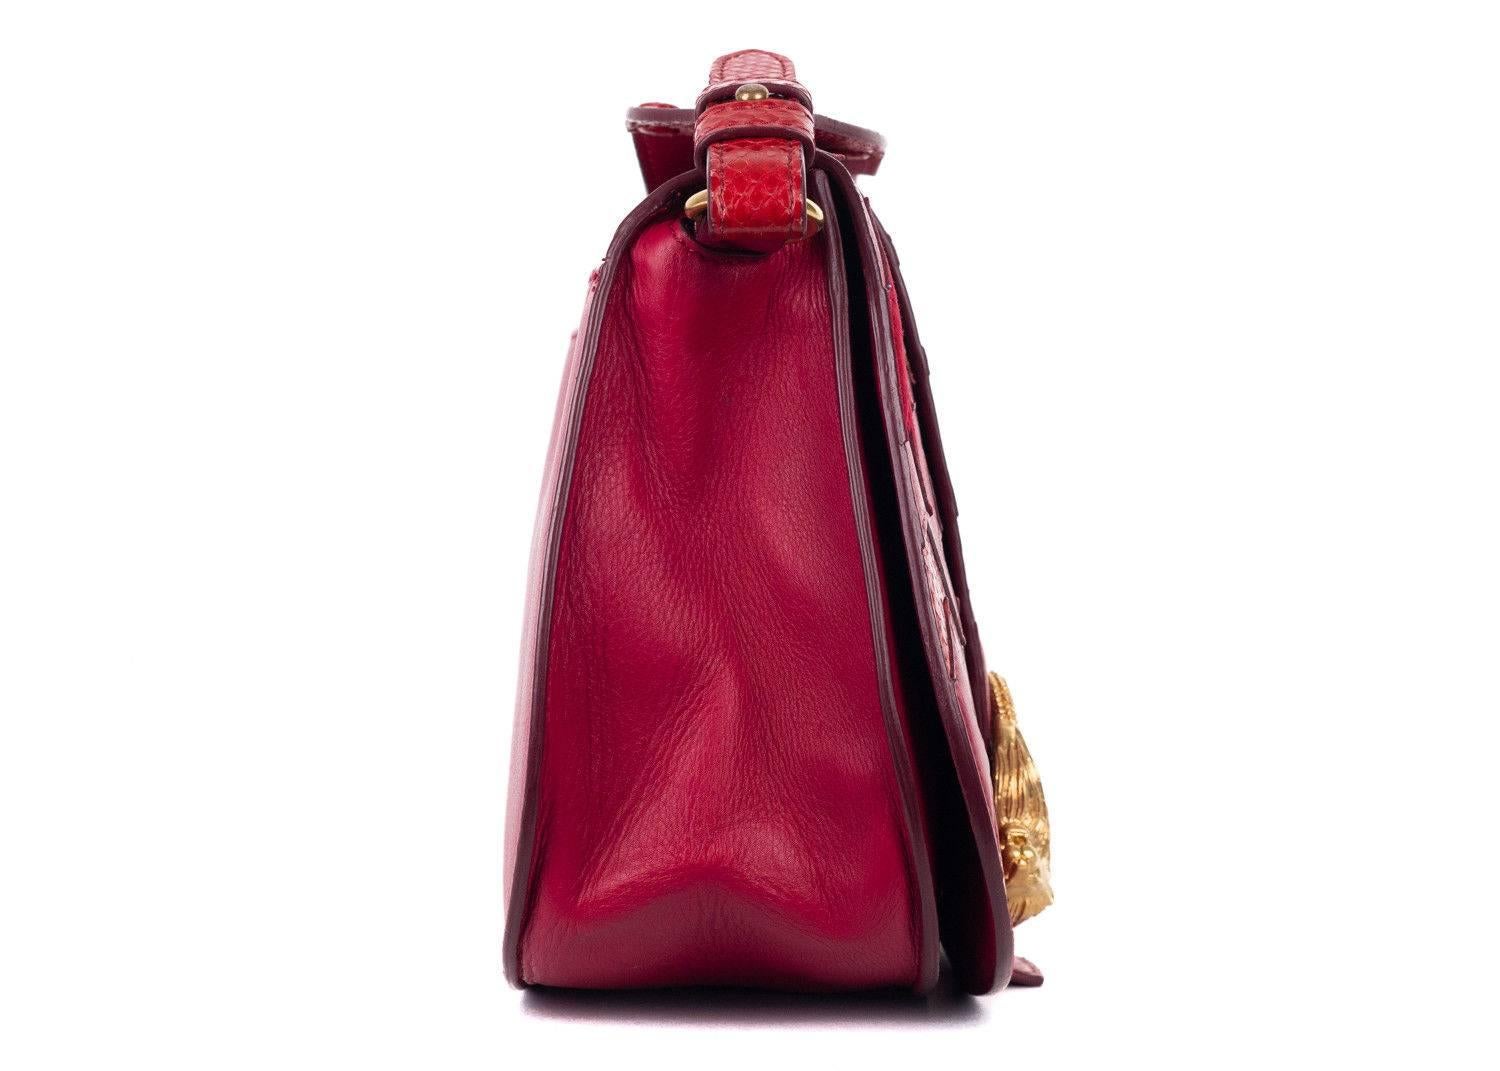 Roberto Cavalli red leather shoulder bag. This shoulder bag features snake embossed print sar detailing and a lion gold pendant in the front. This bag is sure to give a pop to your everyday style with its bold color. Pair it with simple jeans and